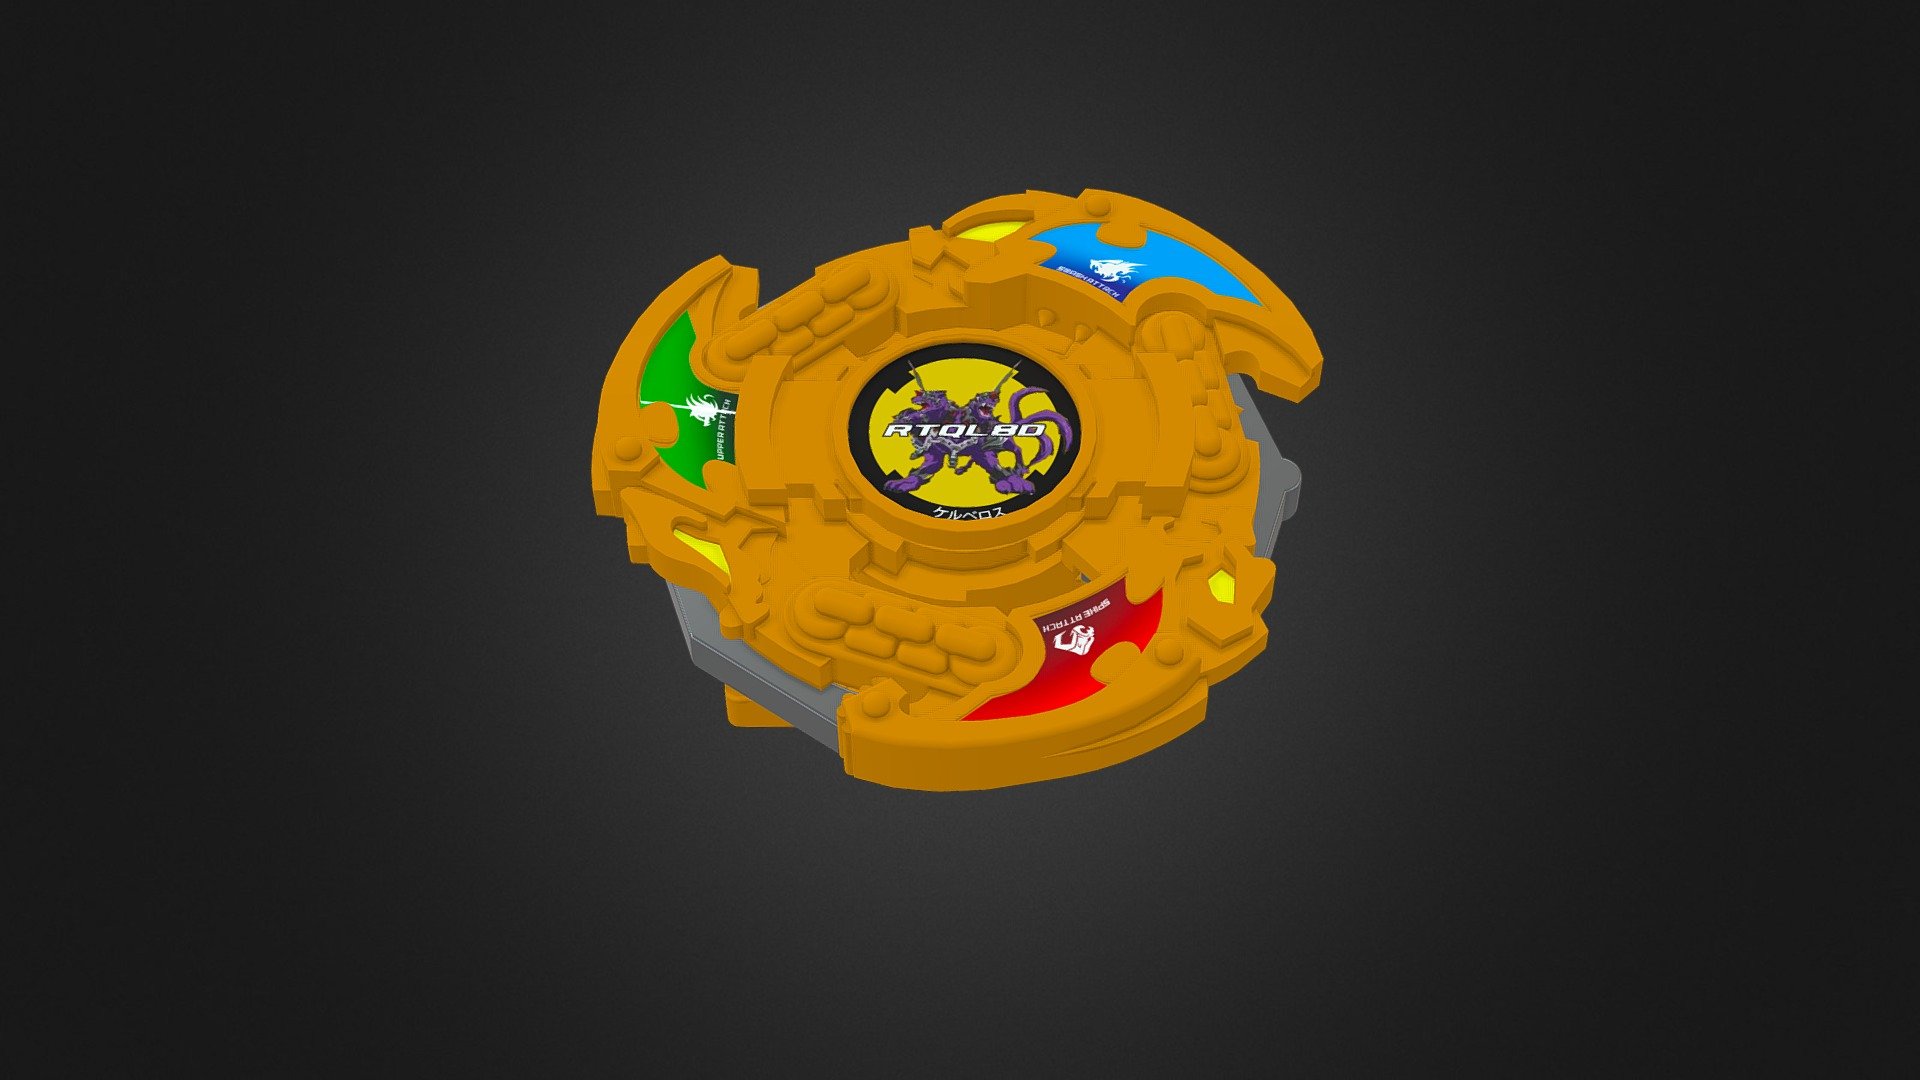 Zeo's Beyblade from Season 2 of the anime. I had to painfully recreate the font and &ldquo;beast